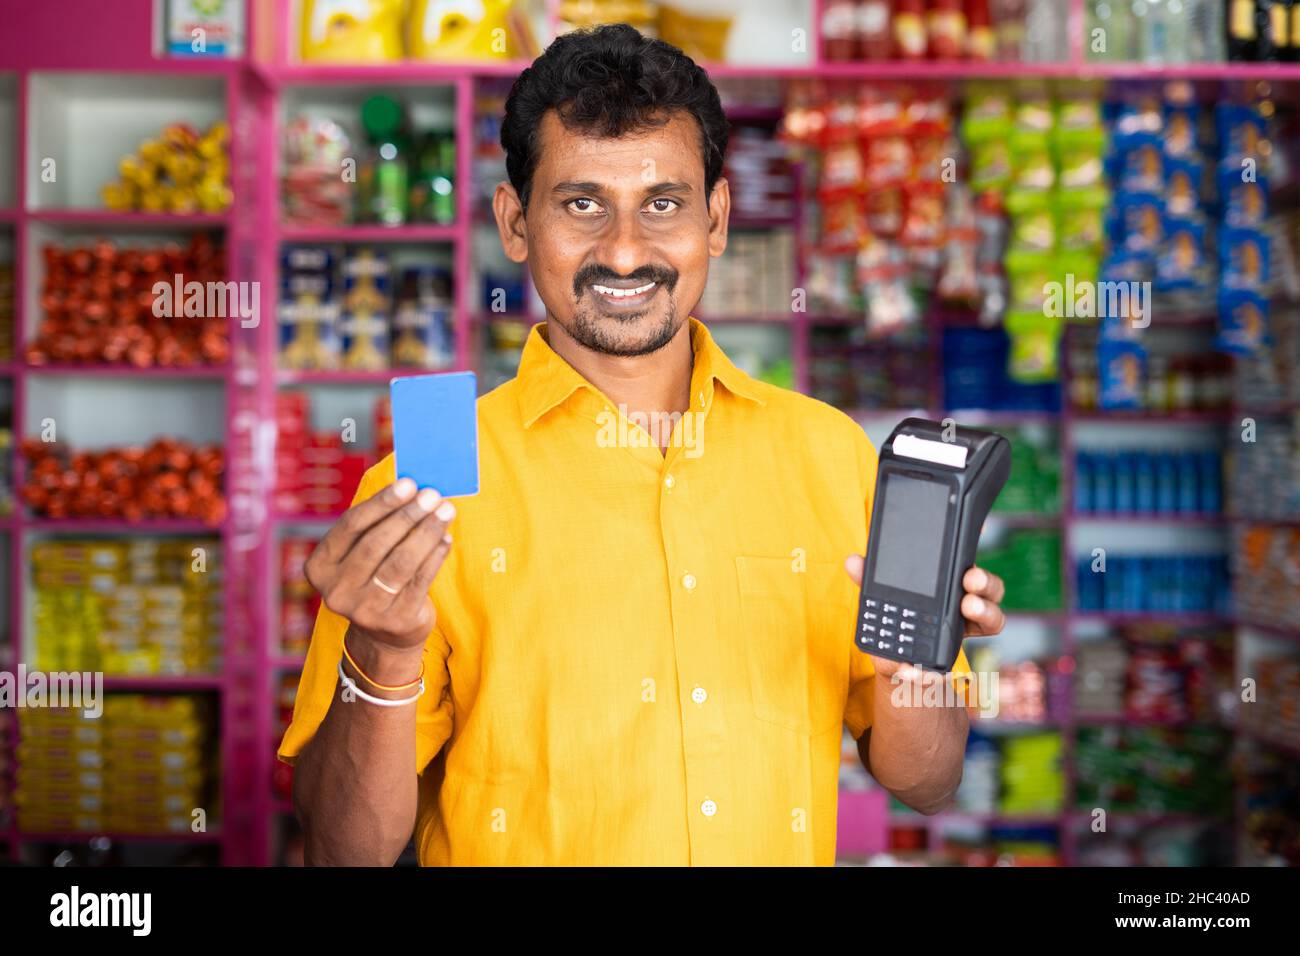 Kirana or groceries merchant showing credit card and swiping POS machine - concept of accepting Digital payment in retail business, cashless purchase Stock Photo